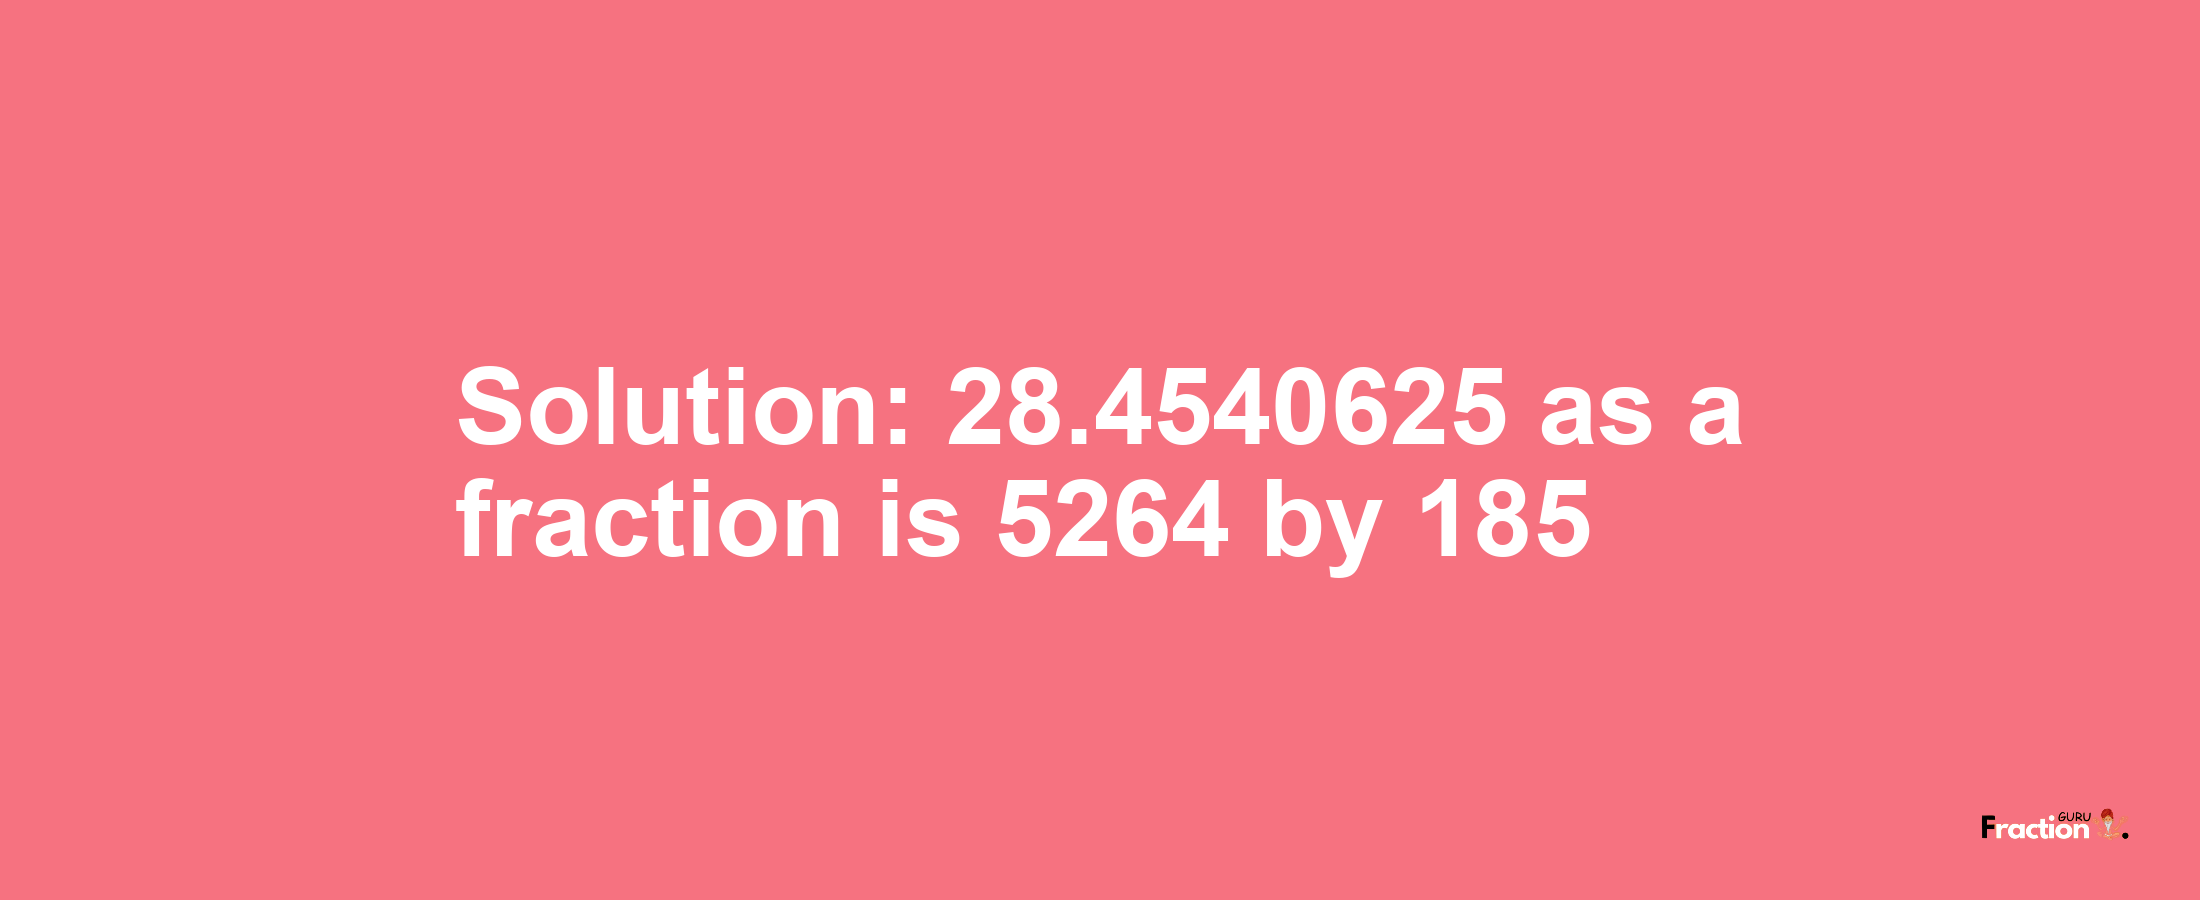 Solution:28.4540625 as a fraction is 5264/185